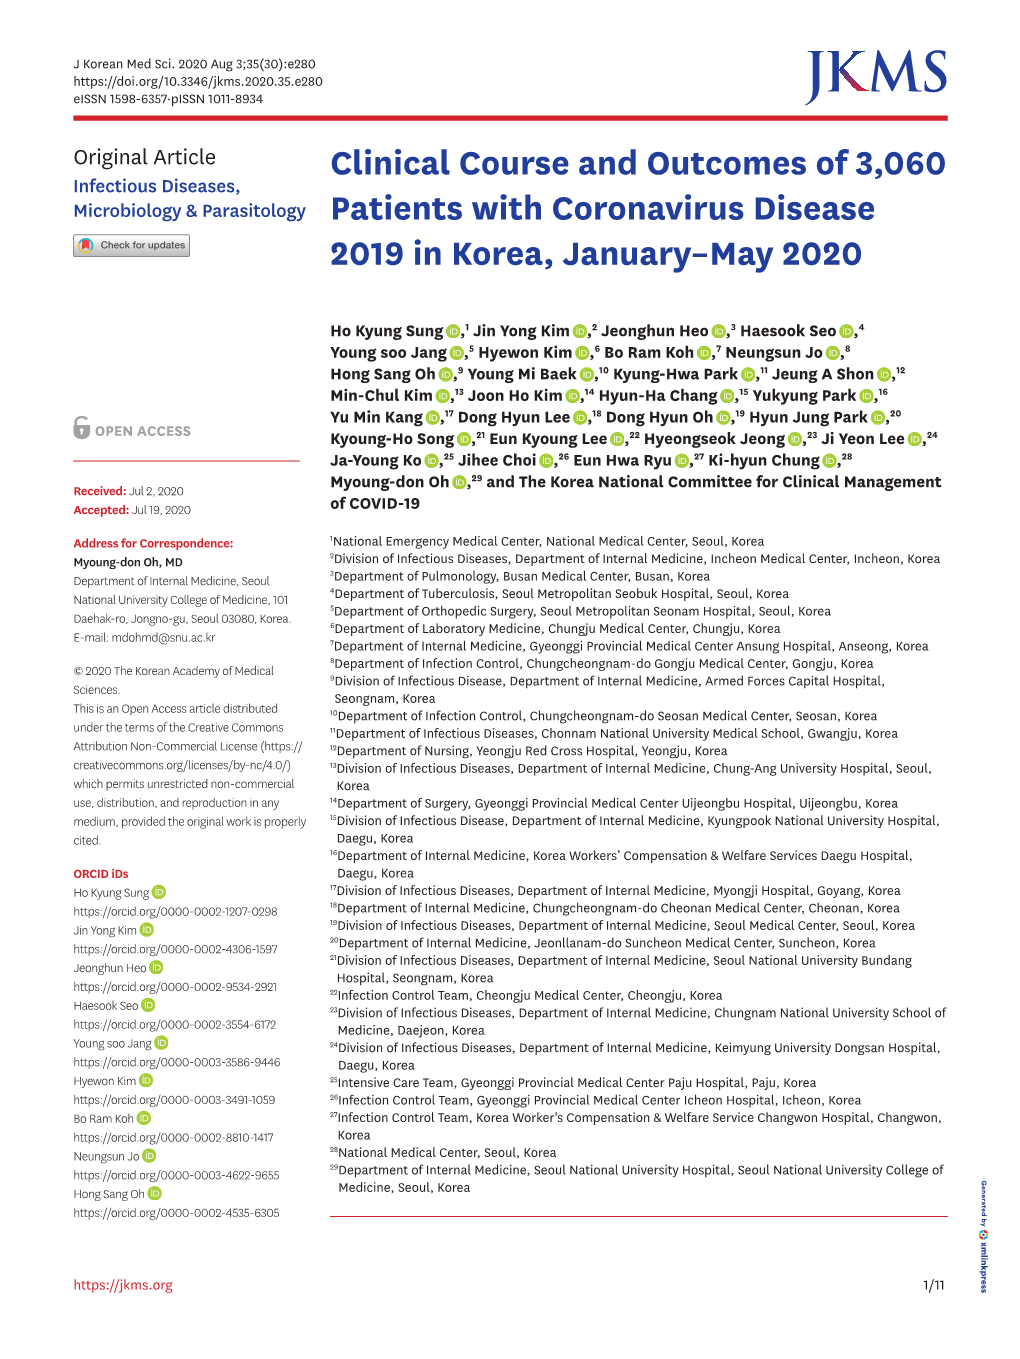 Clinical Course and Outcomes of 3,060 Patients with Coronavirus